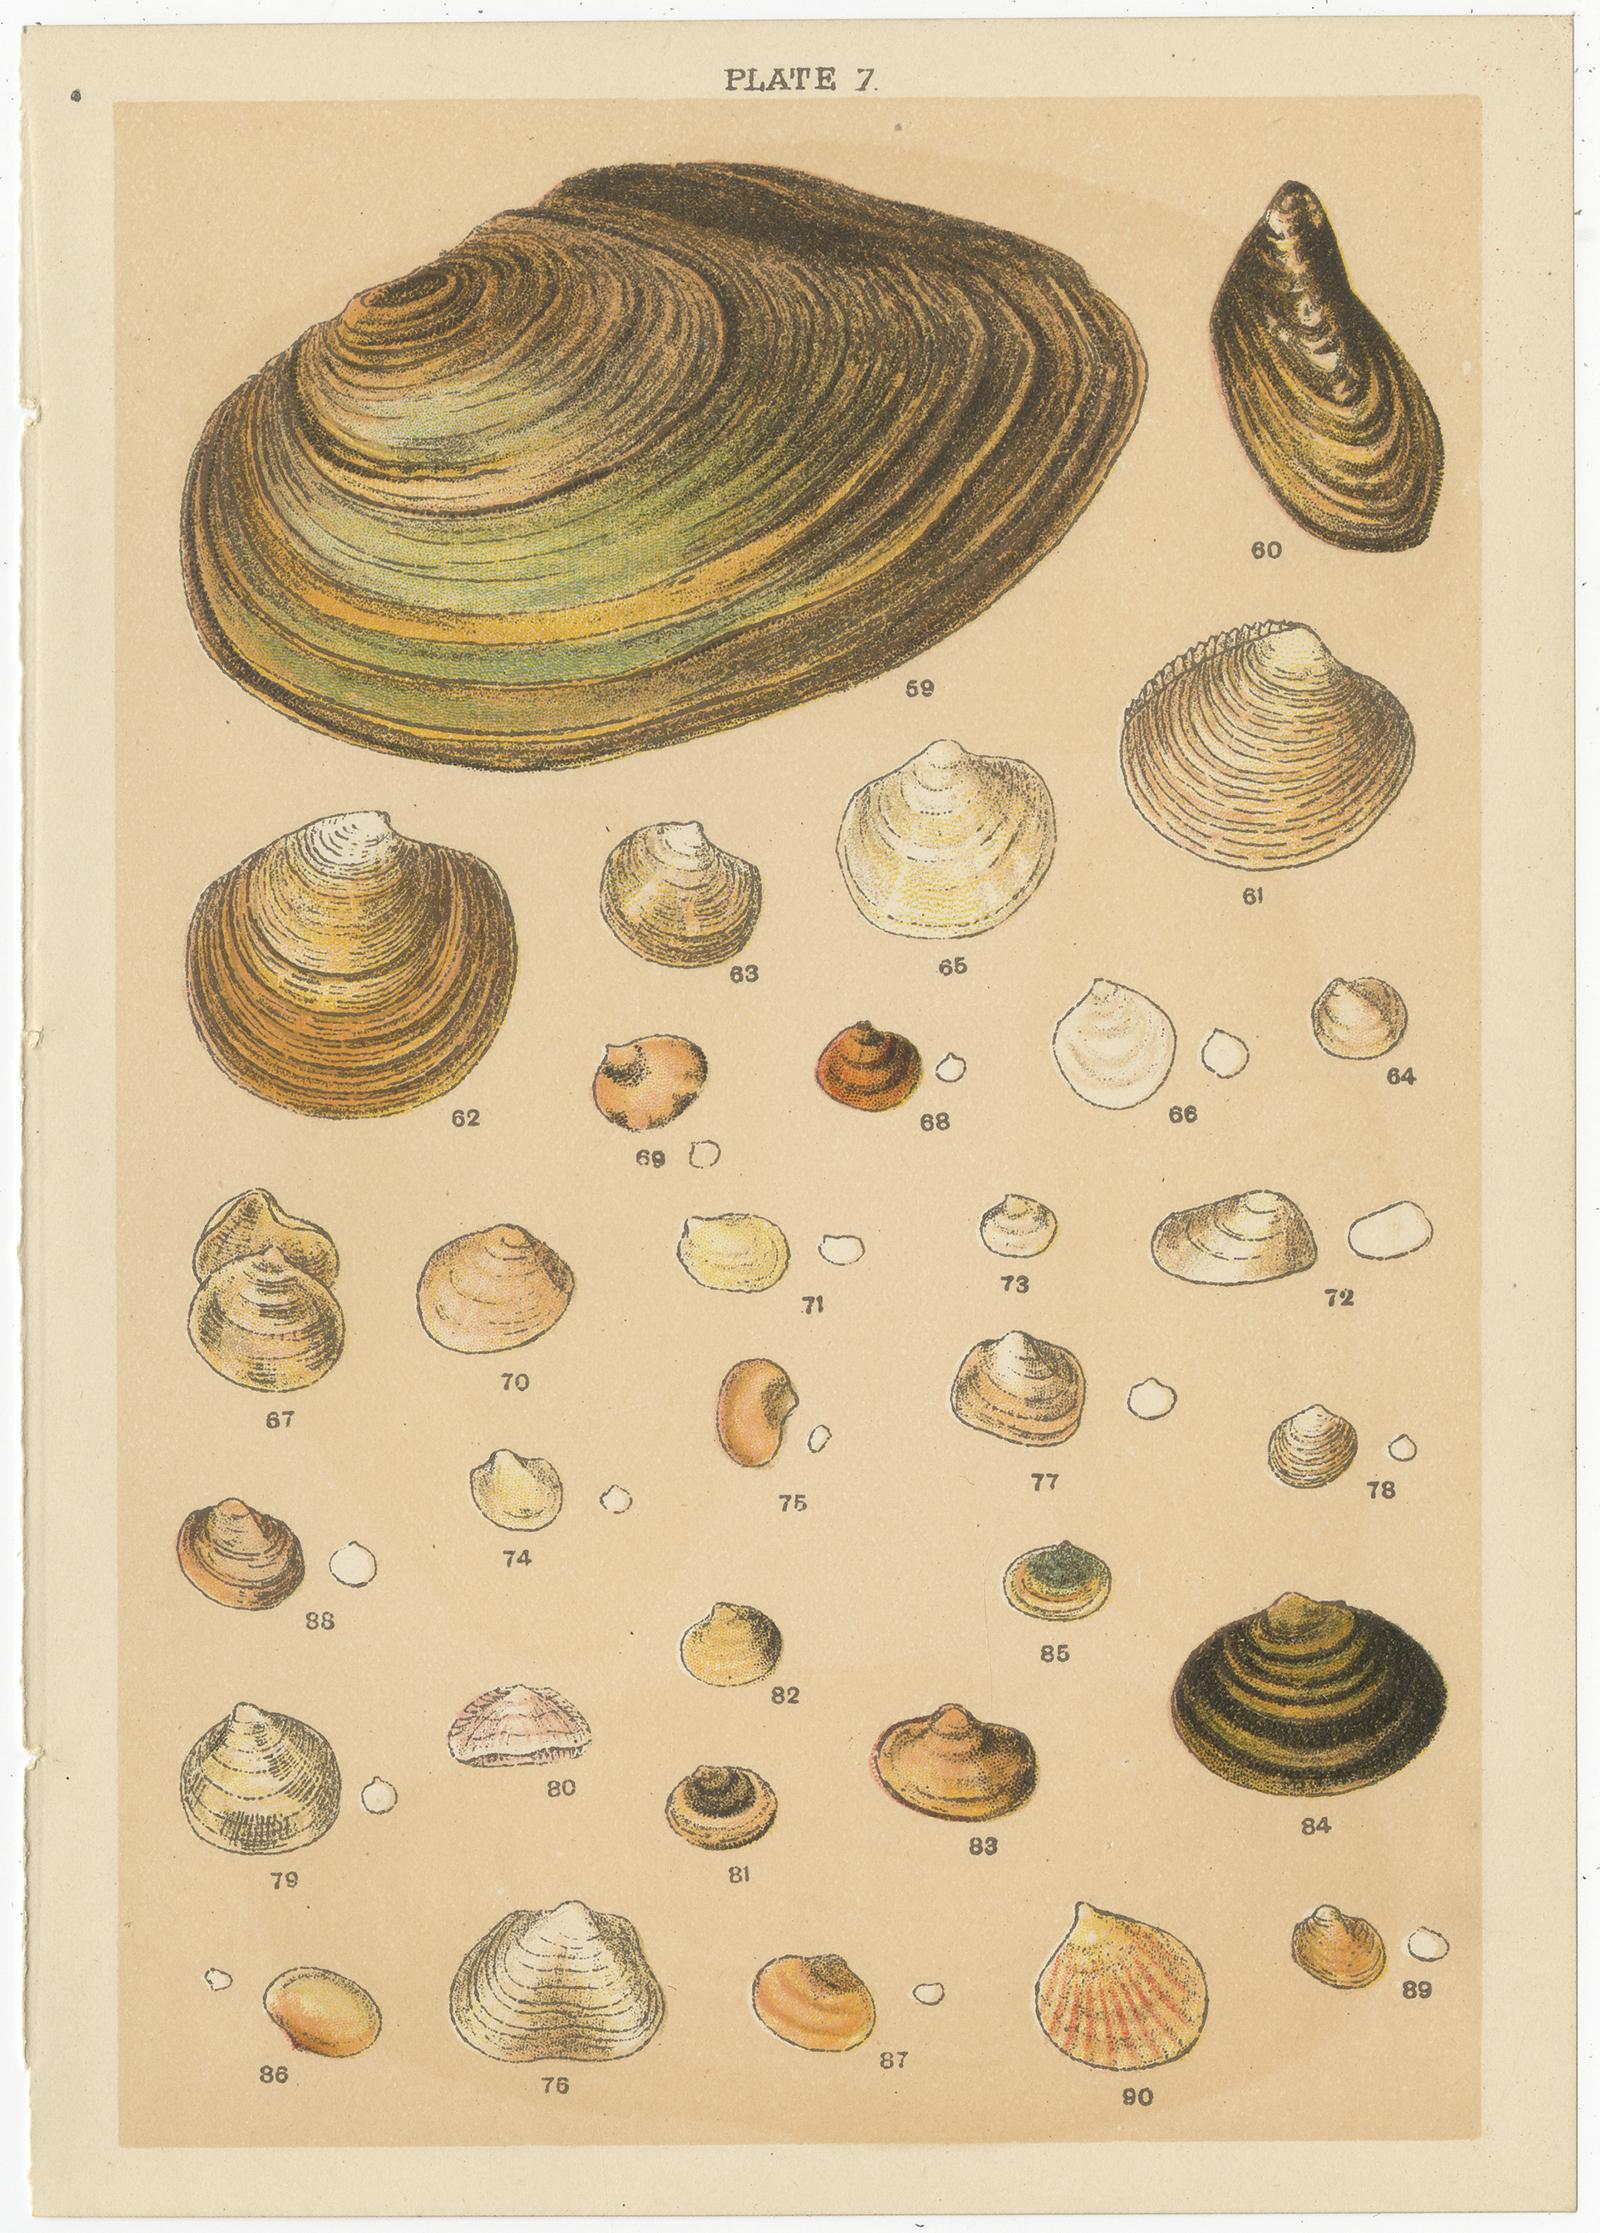 Paper Set of 10 Antique Prints of Shells Including Molluscs by Gordon 'circa 1900' For Sale